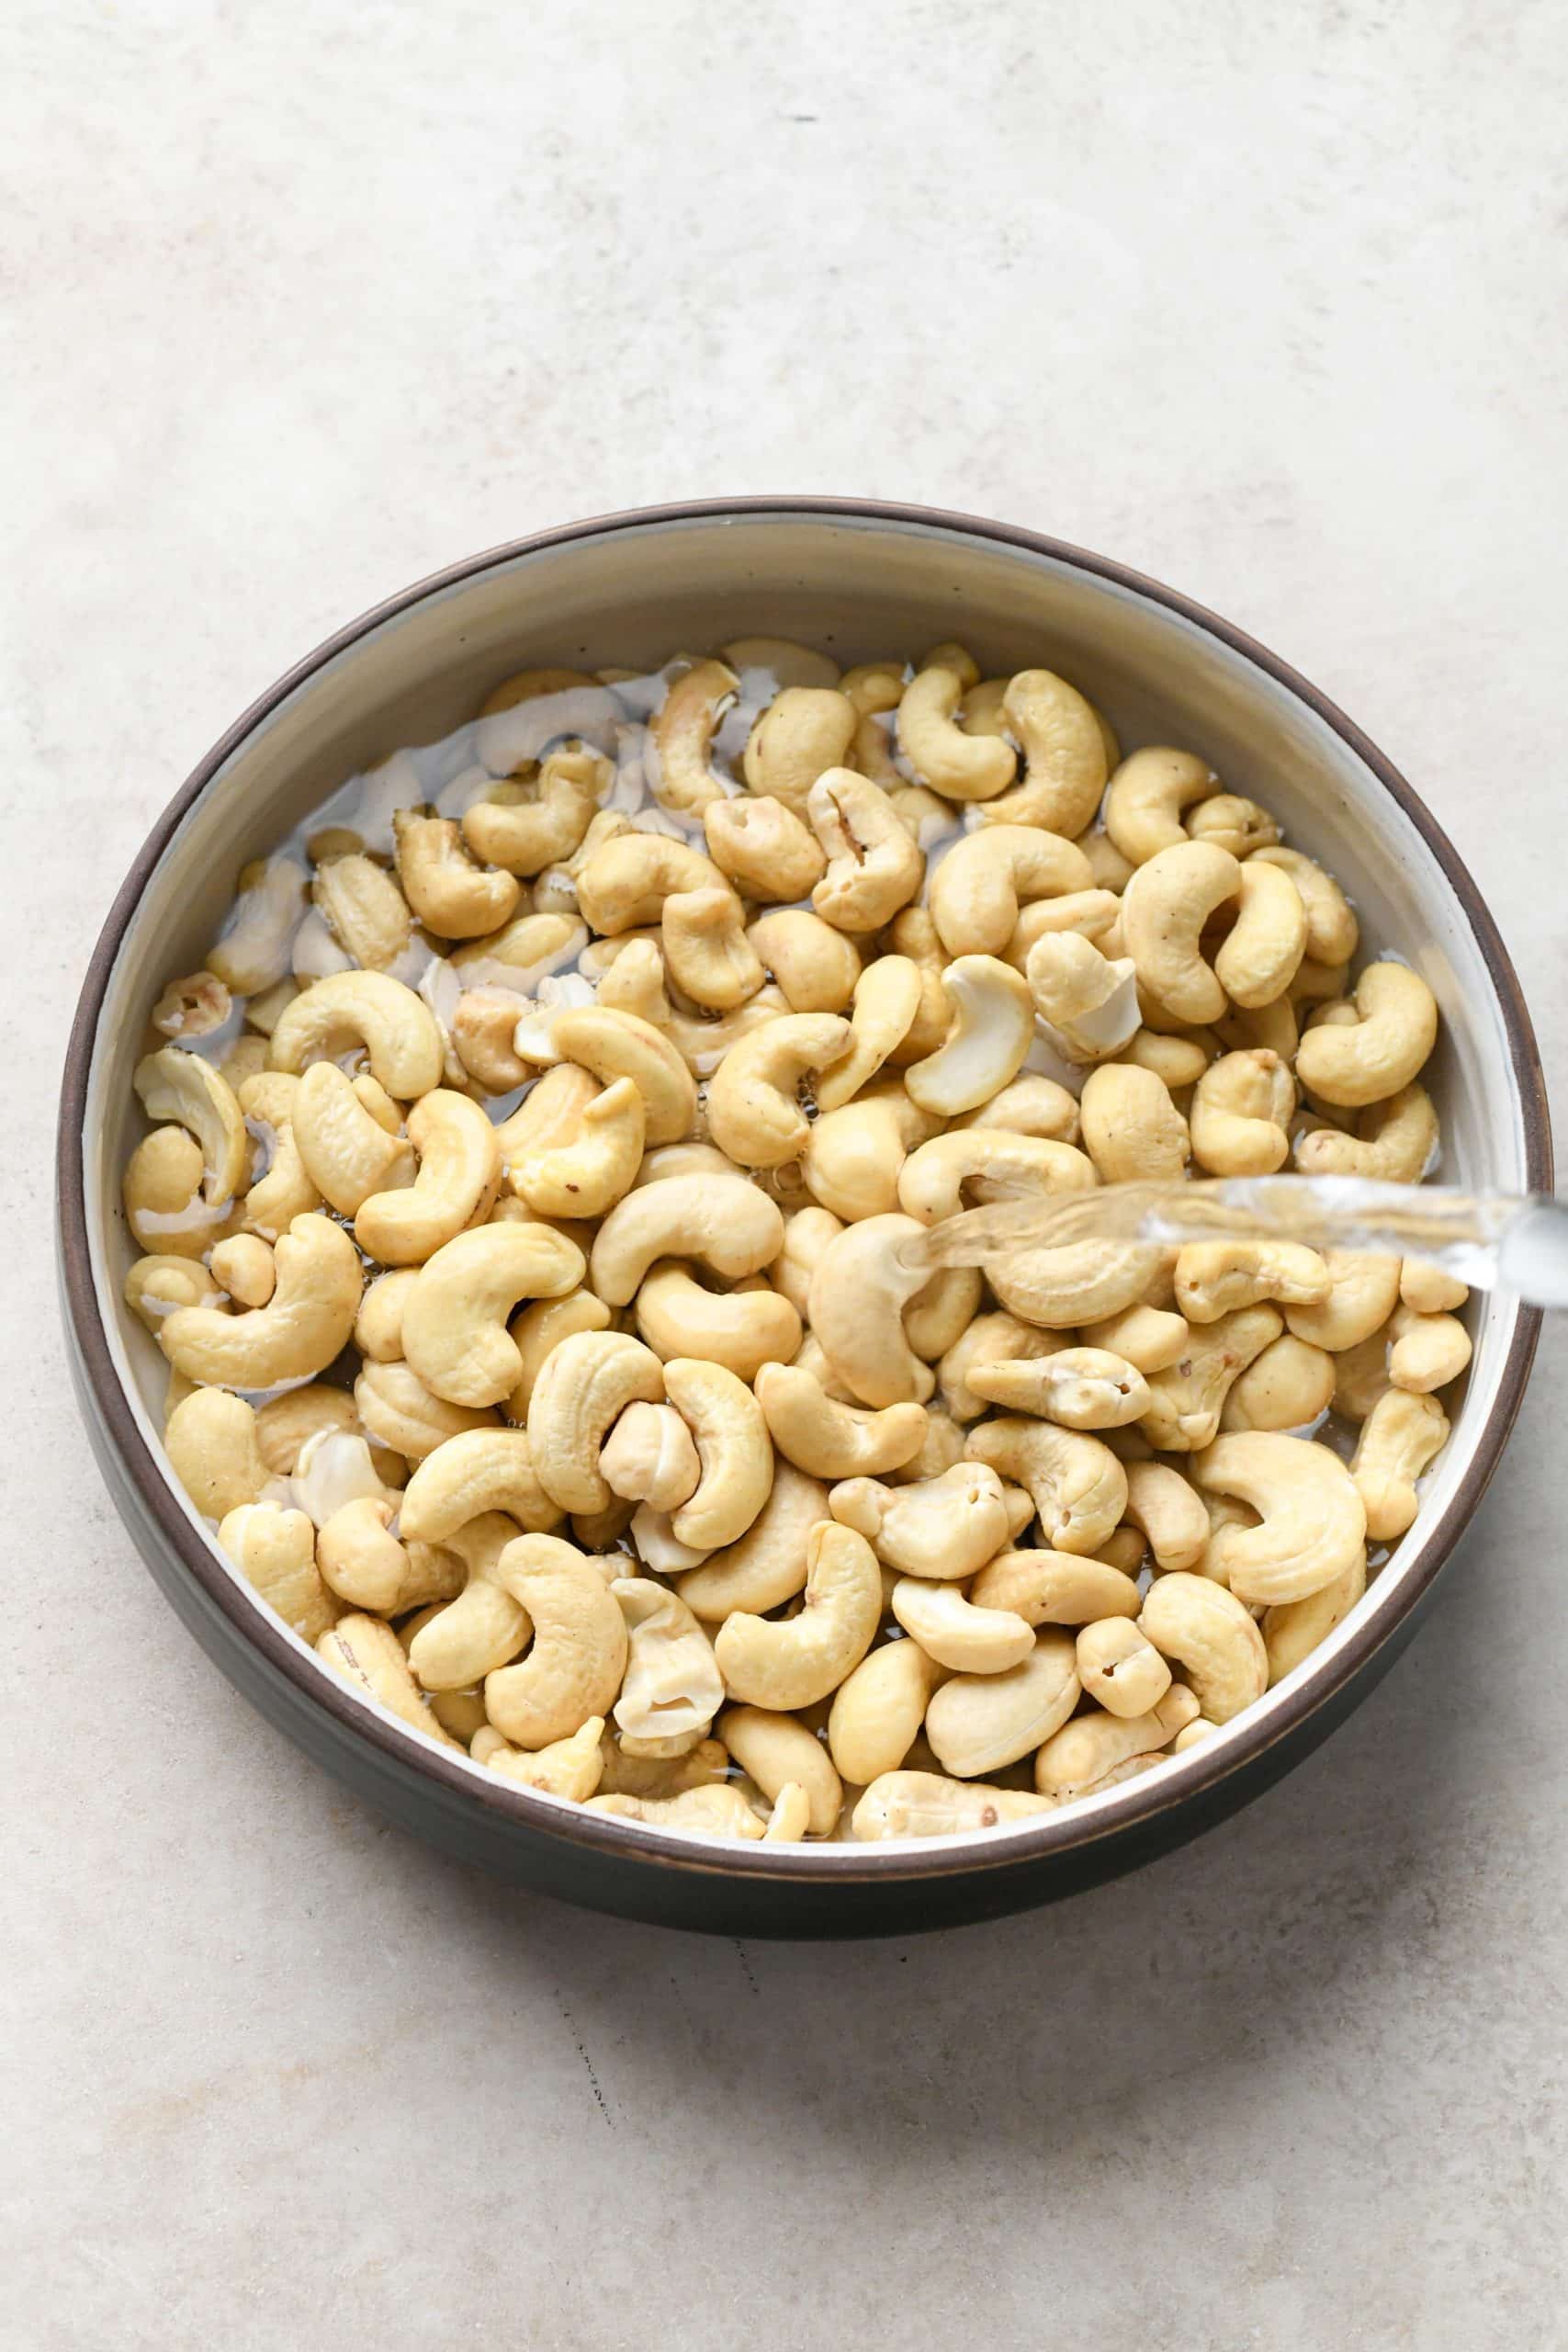 How to make Dairy Free Dill Pickle Dip: Pouring hot water over raw cashews in a shallow bowl.